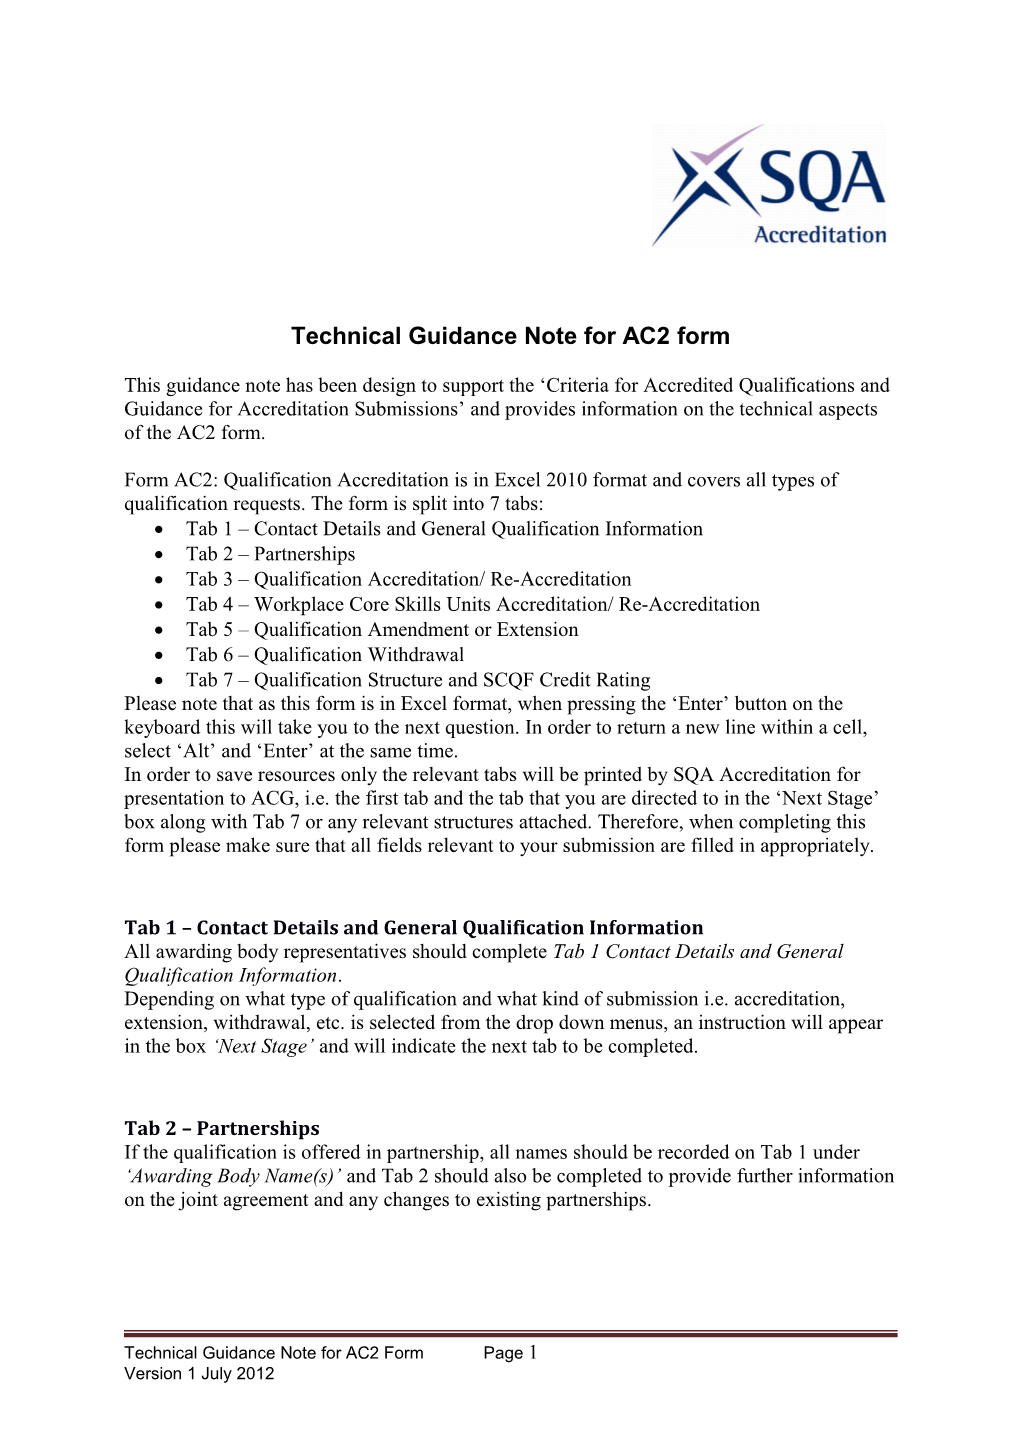 Technical Guidance Note for AC2 Form